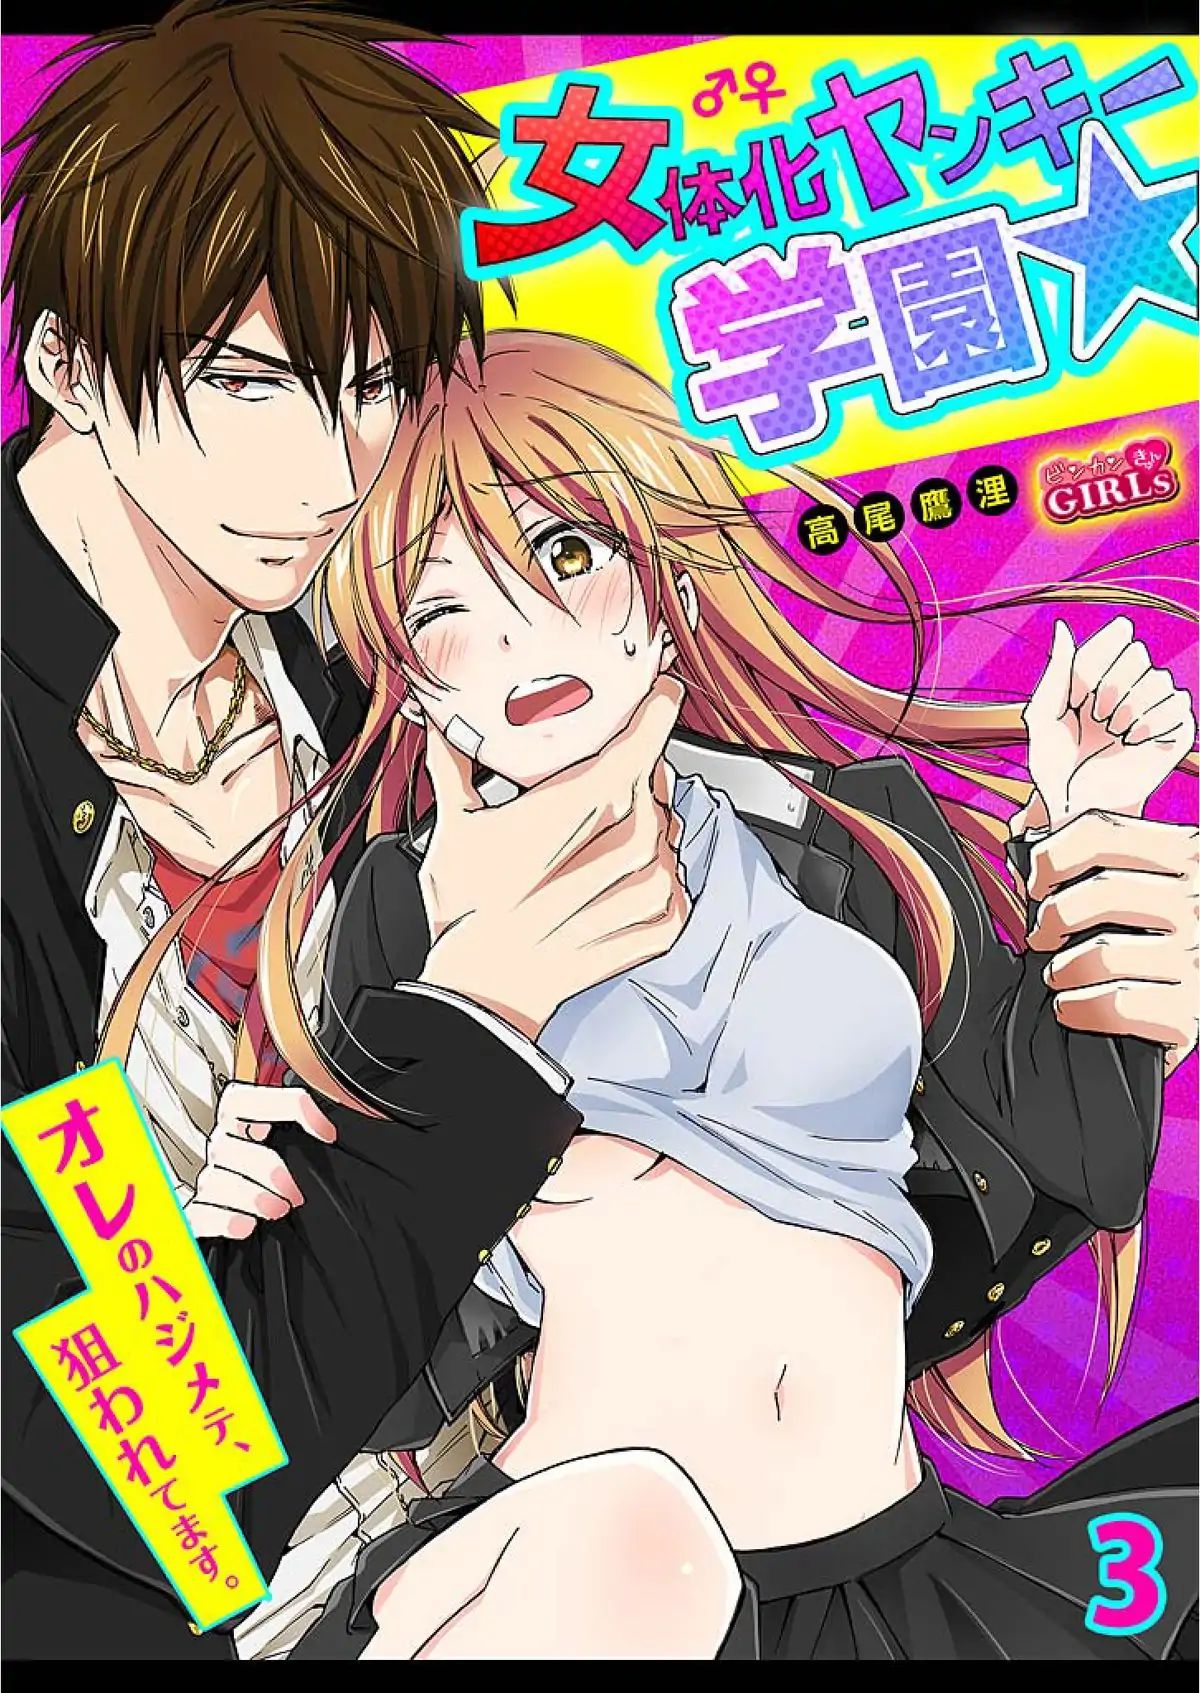 Gender-Swap at the Delinquent Academy -He's Trying to Get My First Time!- - chapter 3 - #1